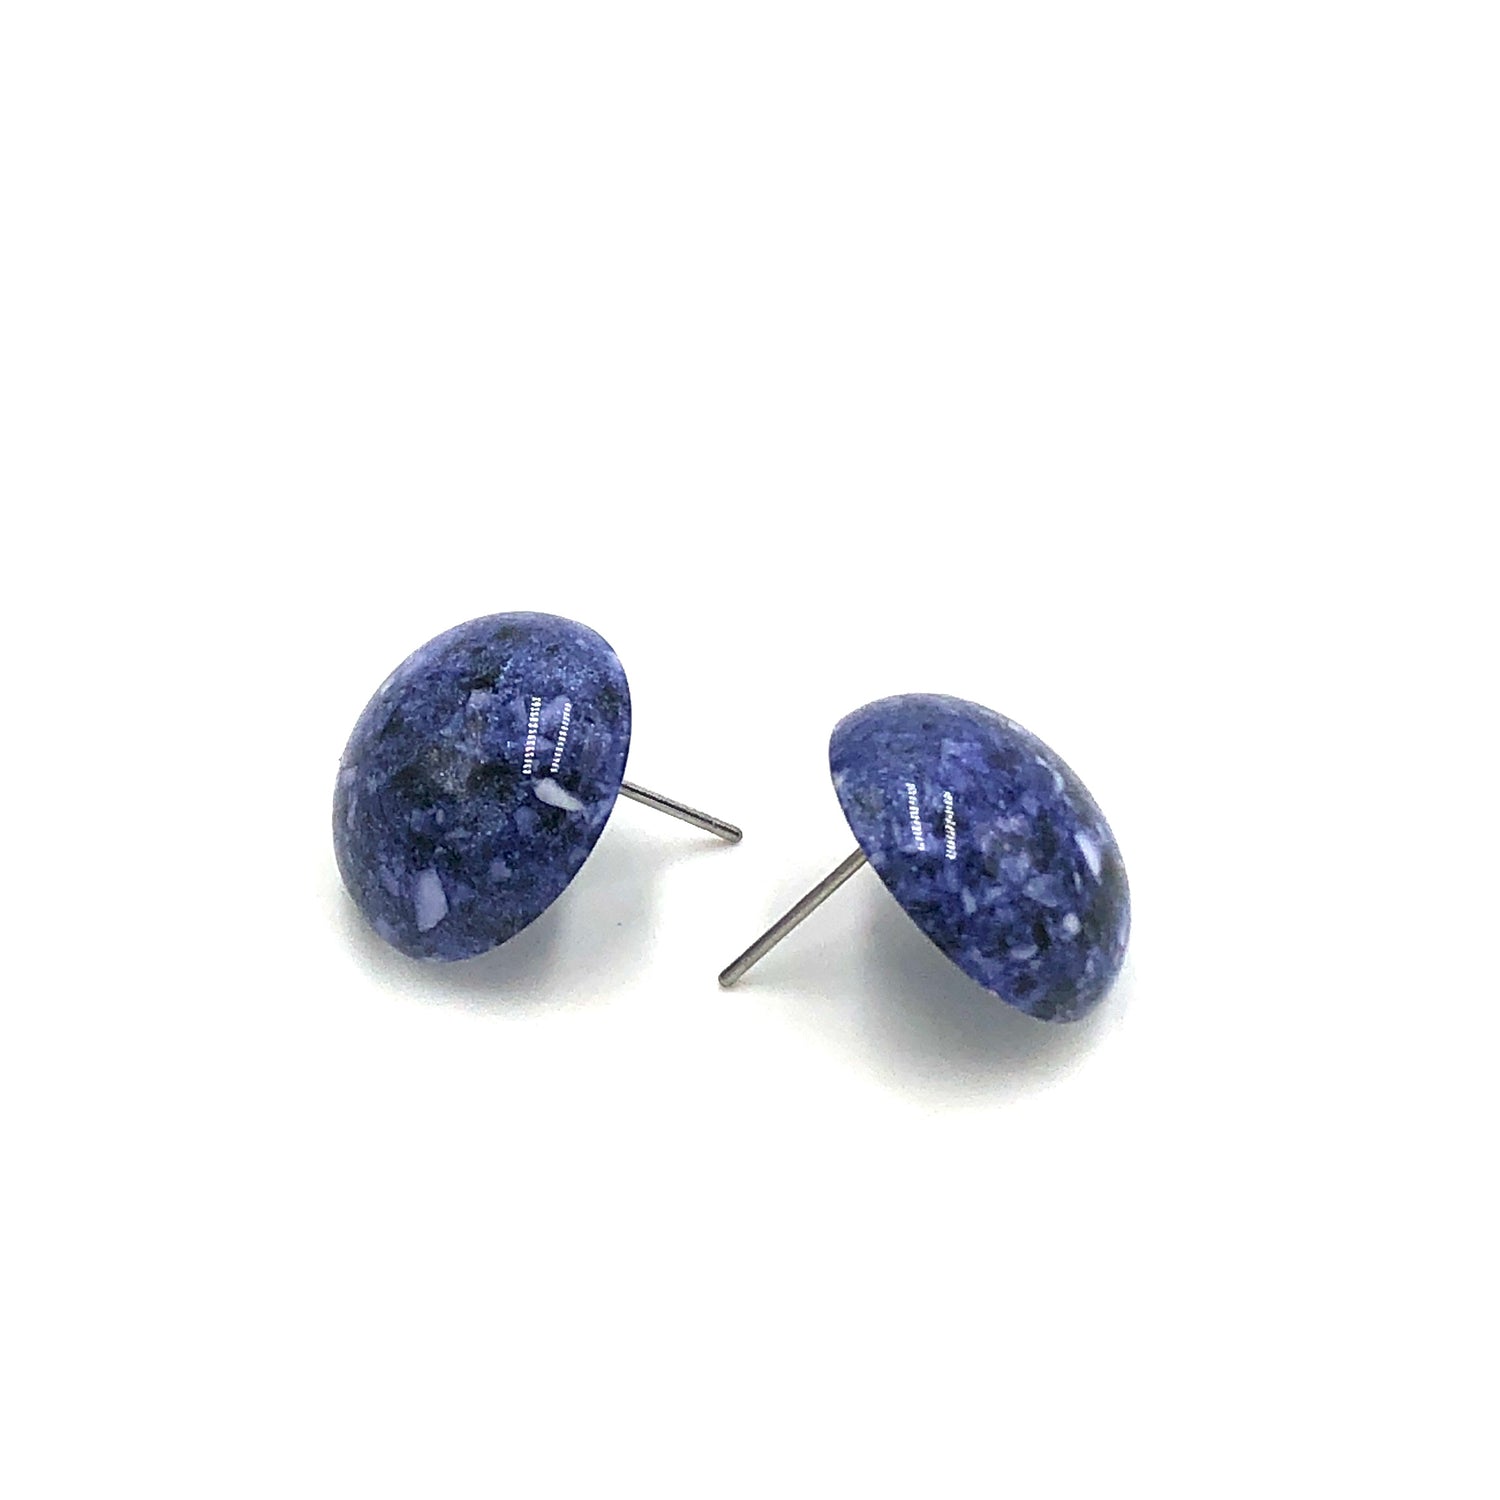 Periwinkle Speckled Mosaic Retro Button Stud Earrings